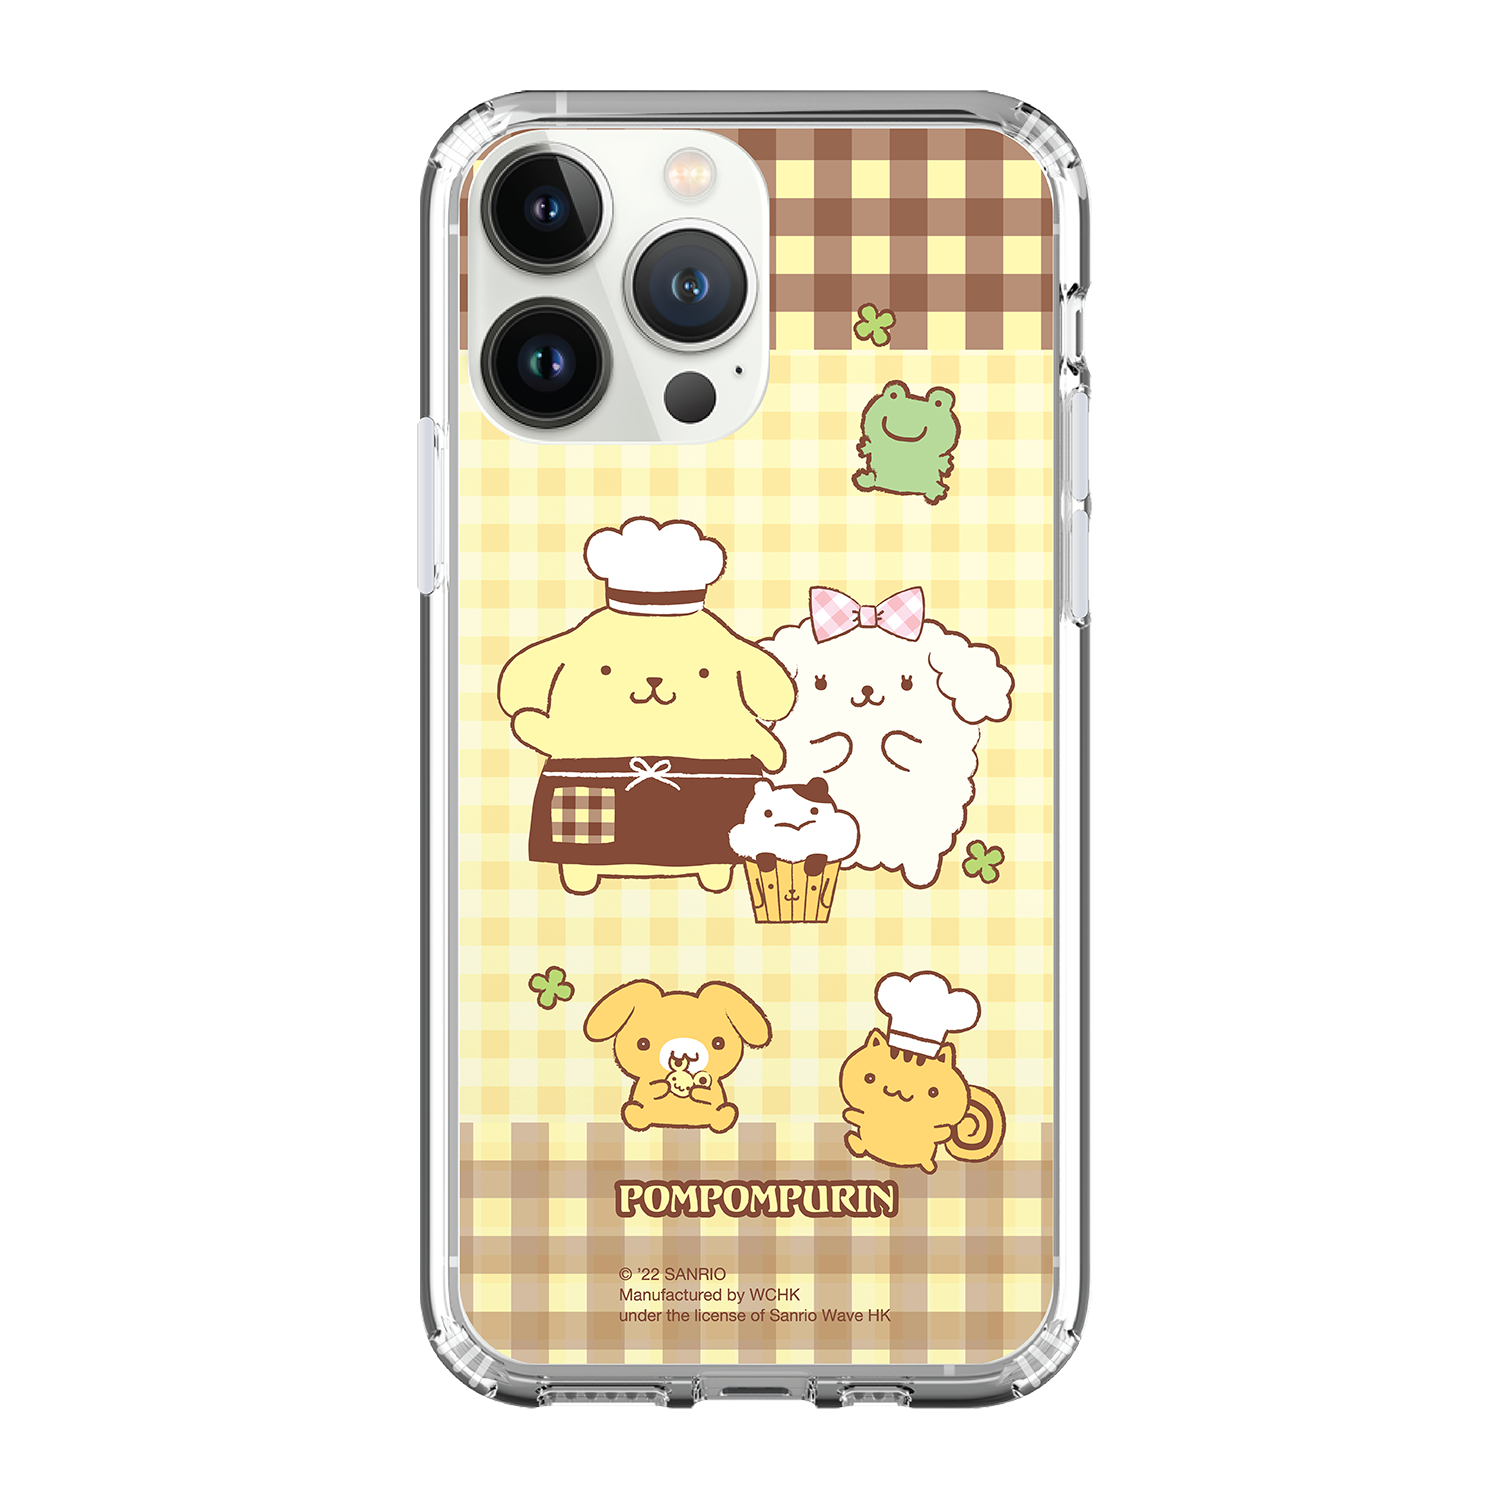 Pom Pom Purin Clear Case / iPhone Case / Android Case / Samsung Case 防撞透明手機殼 (PN108)